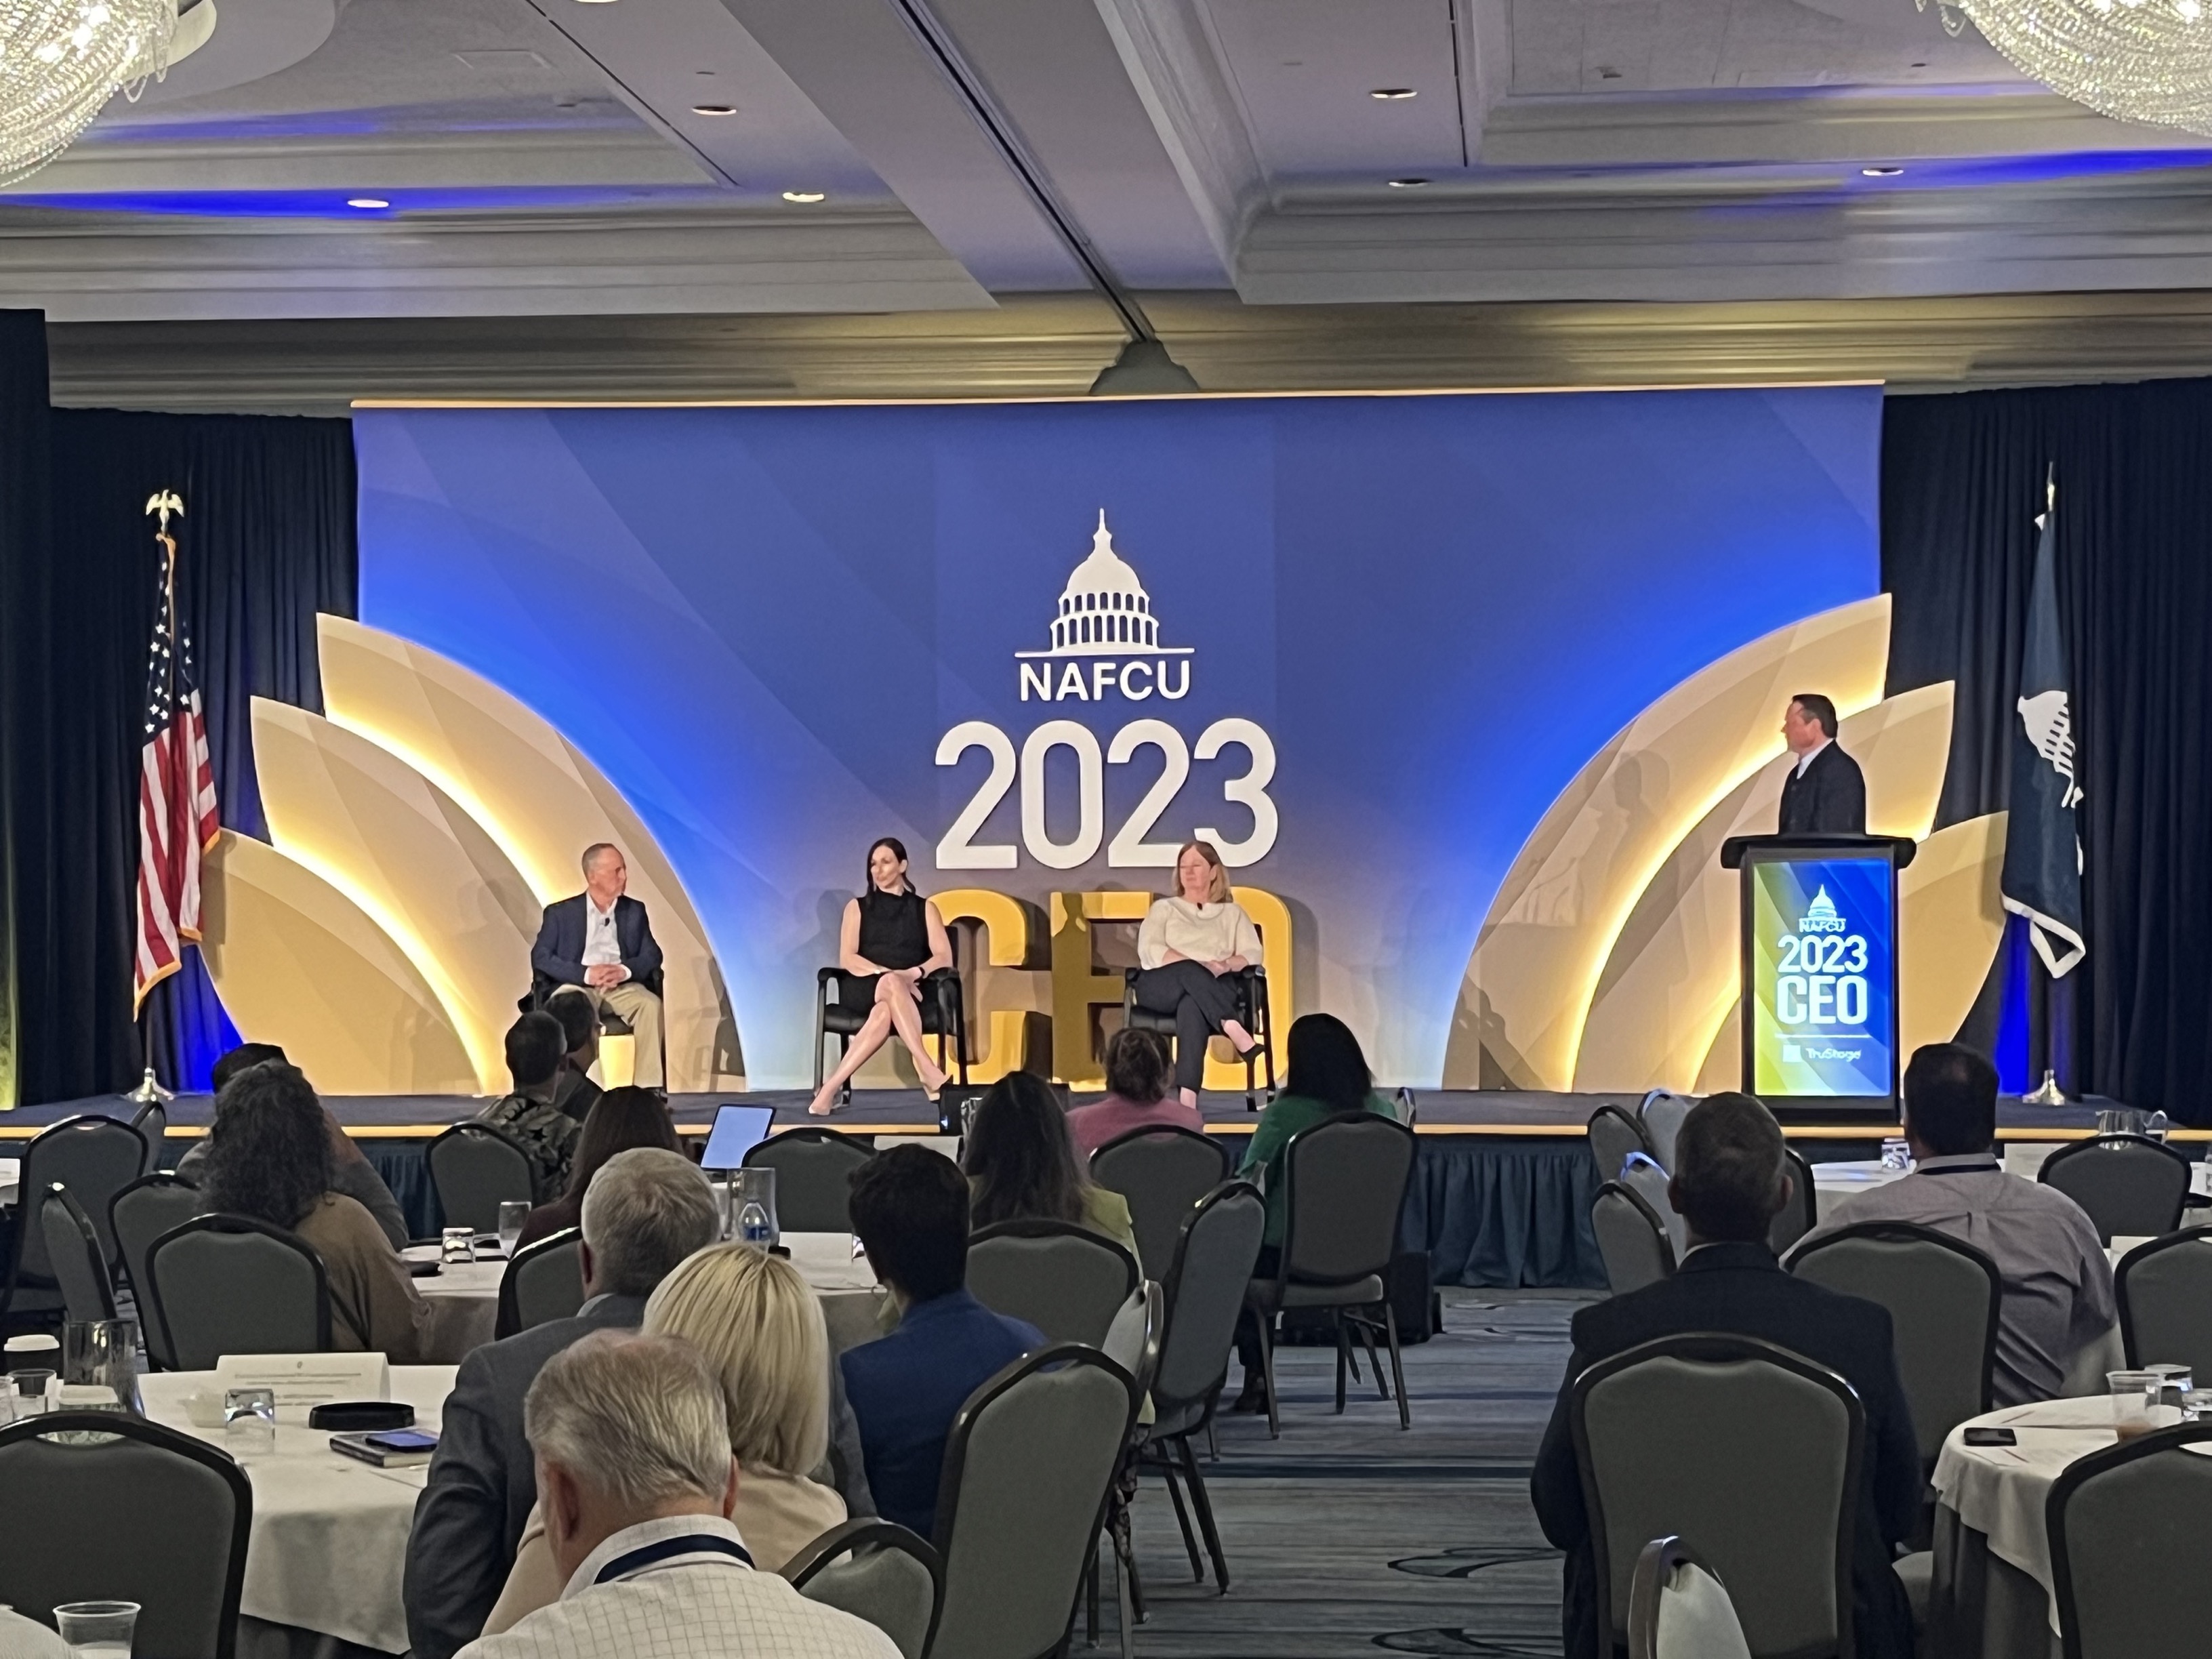 NAFCU President and CEO Dan Berger leading panel discussion at the 2023 CEOs Conference